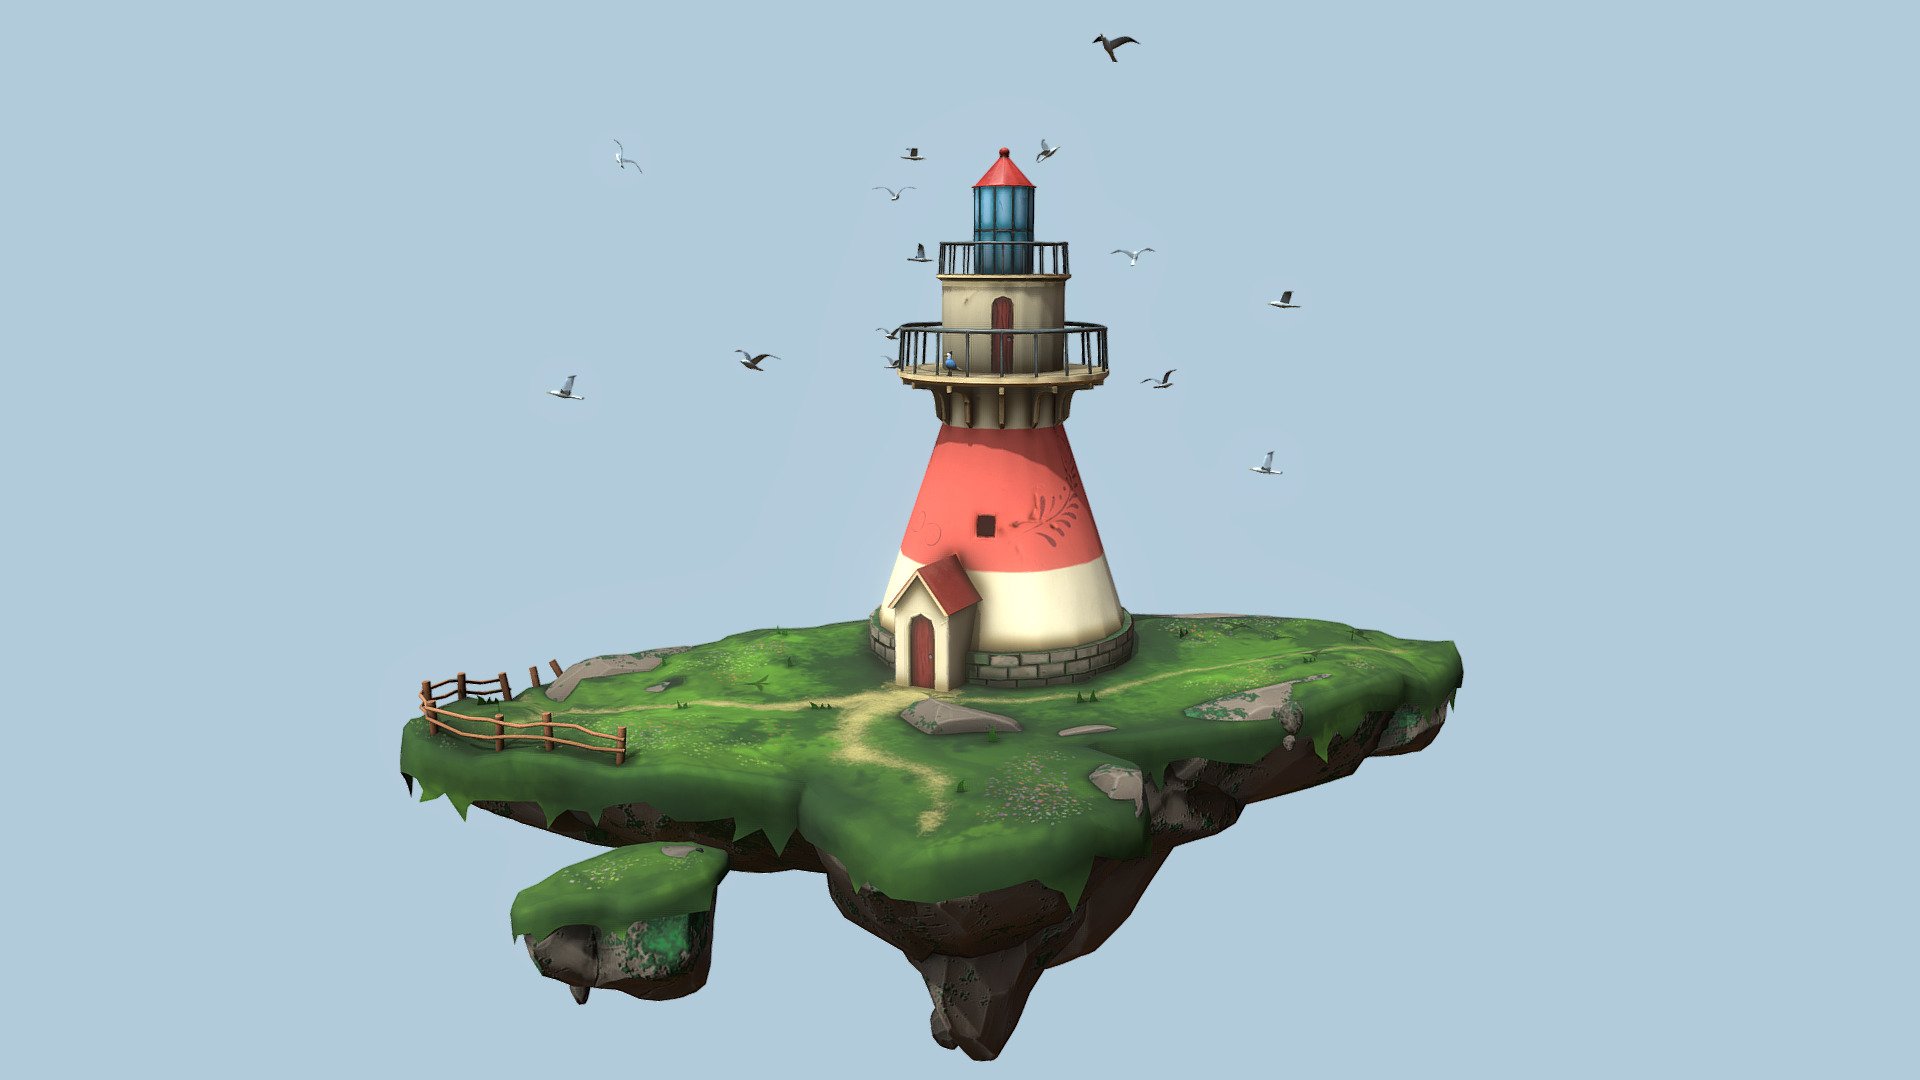 Reupload, cause I added seagulls (very important) 
Made this floating island with a lighthouse in 5 days trying to be done by the end of the week. And I gotta say, this was a marathon. Were a lot of troubles with baking, making fine details. If I had more time I would probably did separate bakes, but not this time. So, about the model: it’s a handpainted lowpoly with baked map from a highpoly. Triangles count: 27,5K. I was going with anime style (Miyazaki movies) and for reference I used artworks of Jim Shore (“Benatrex - Shorelights”), you’ll notice the lighthouse that I recreated.
Feel free to coment on my artwork) - Lighthouse on a floating island - 3D model by Just Jane 666 (@JustJane666) 3d model